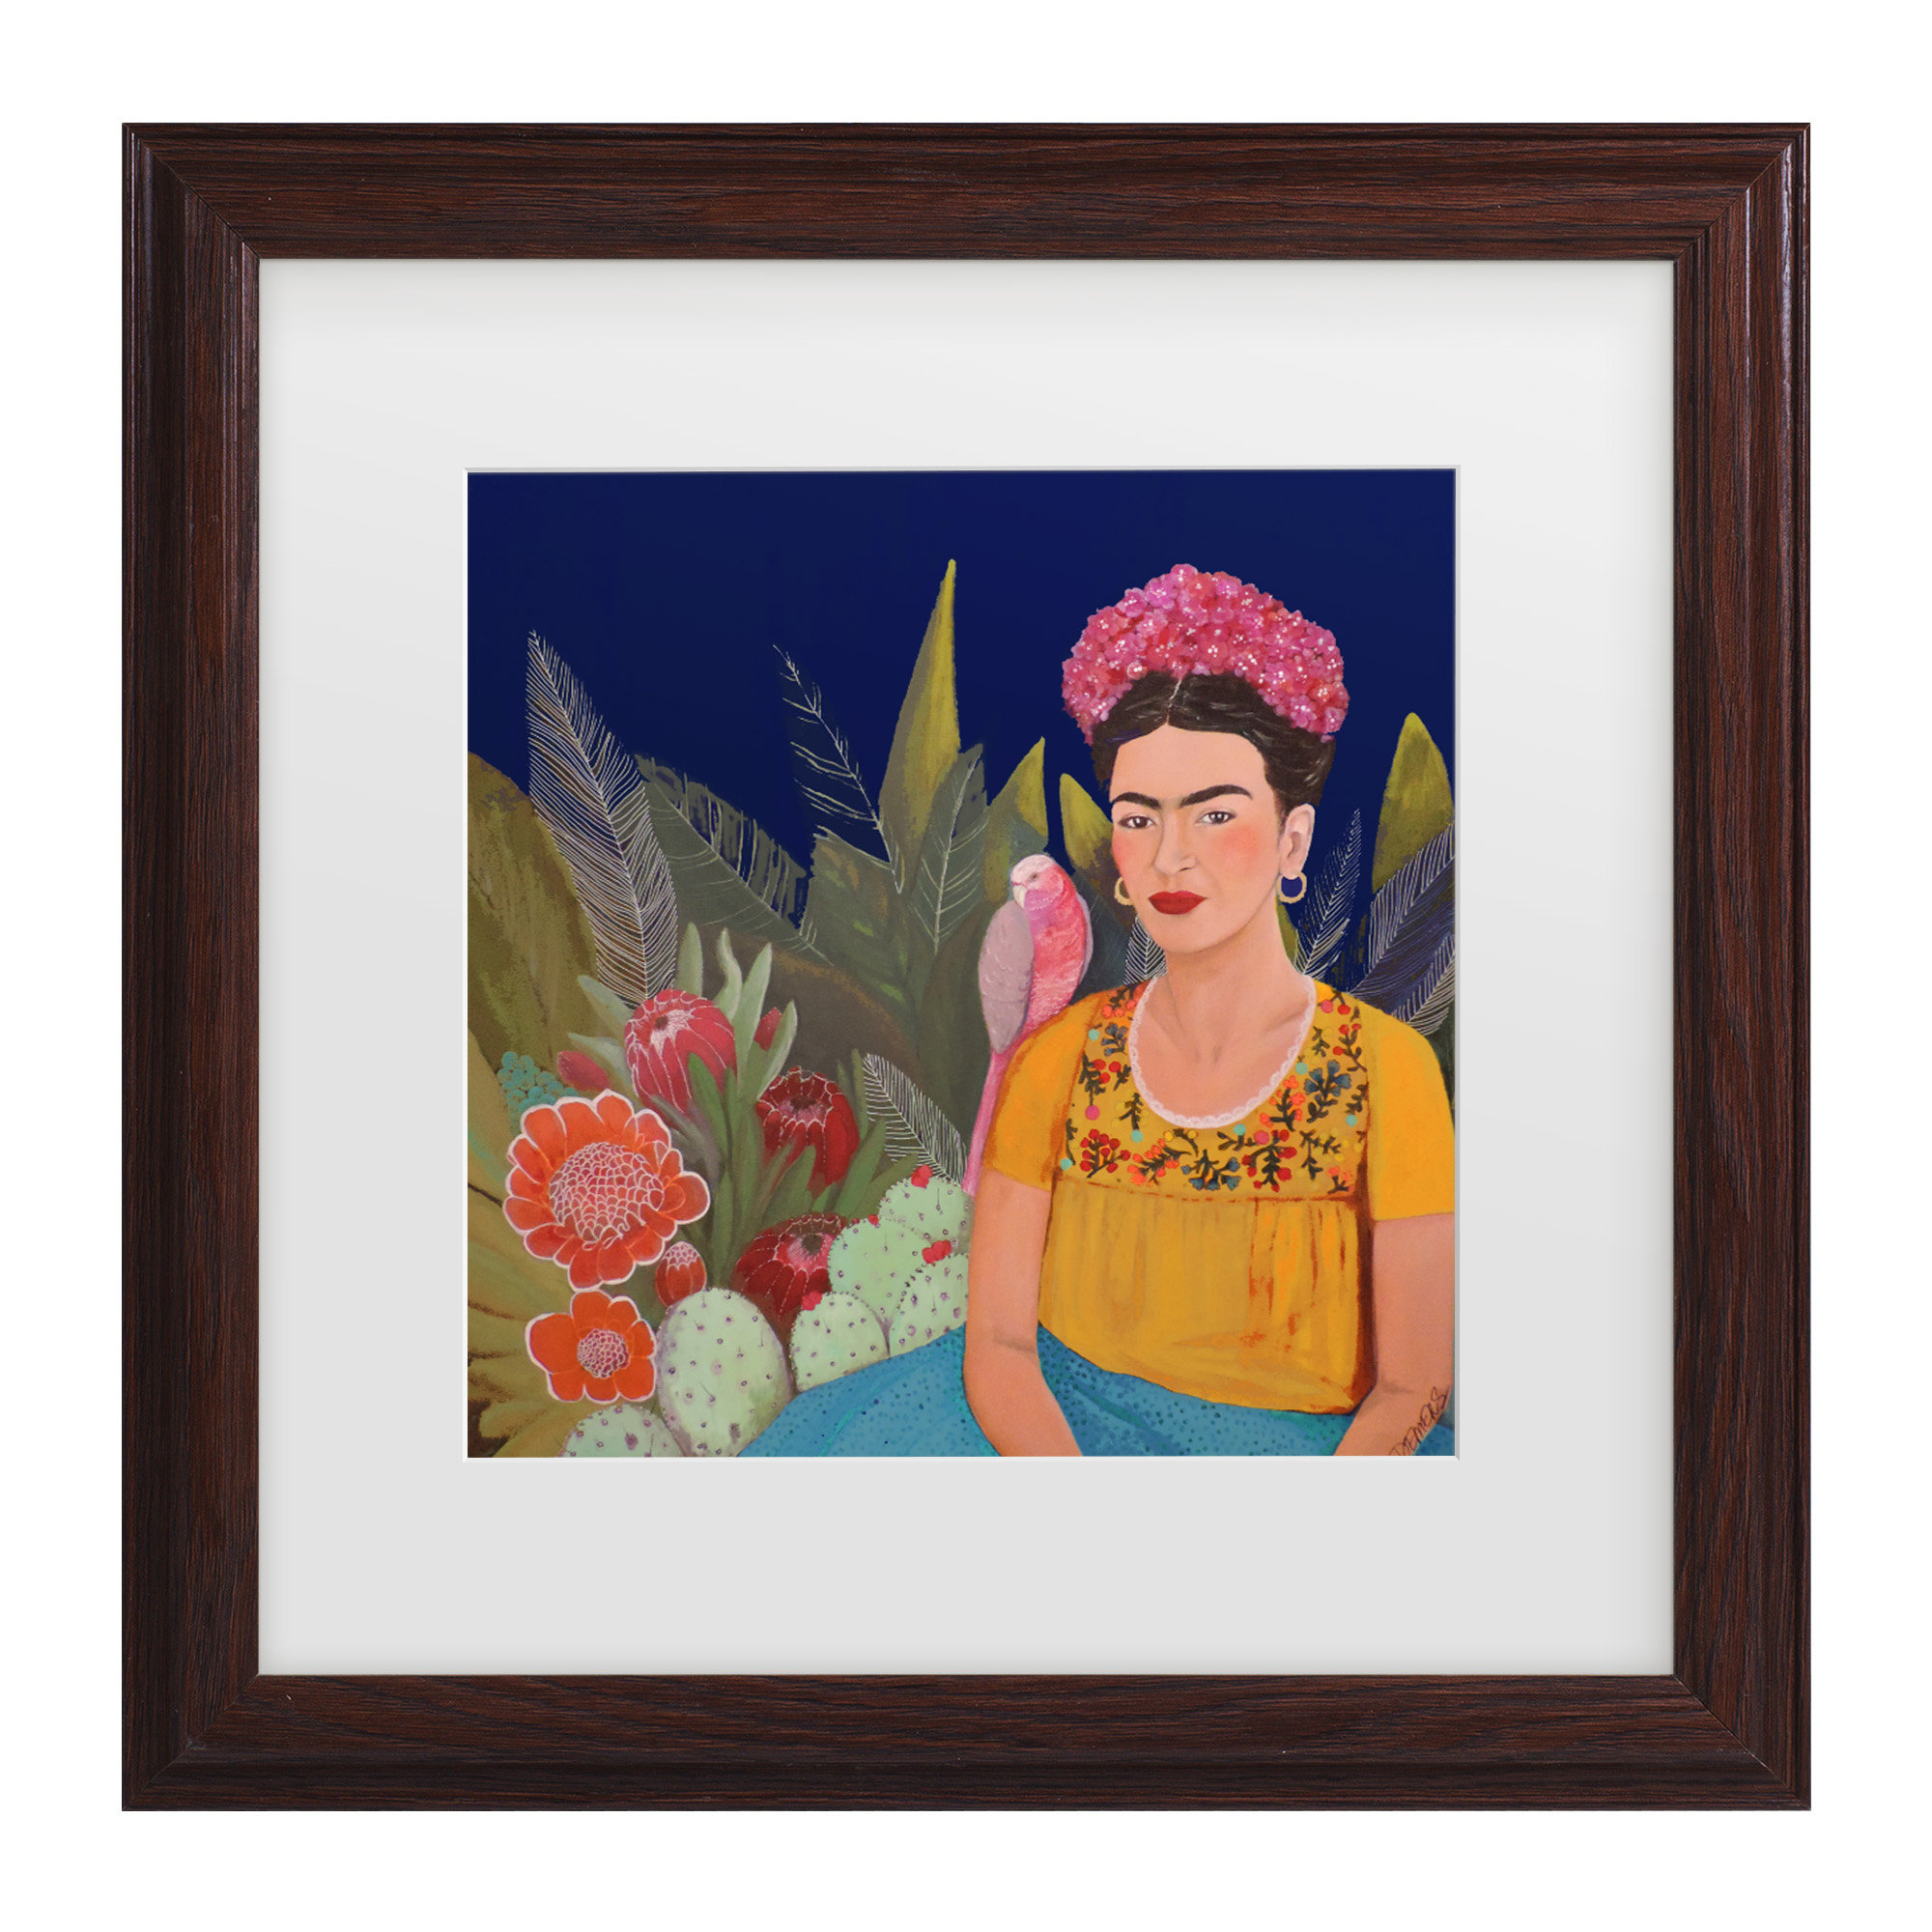 Frida Kahlo Paint-by-Number Kit 8x10